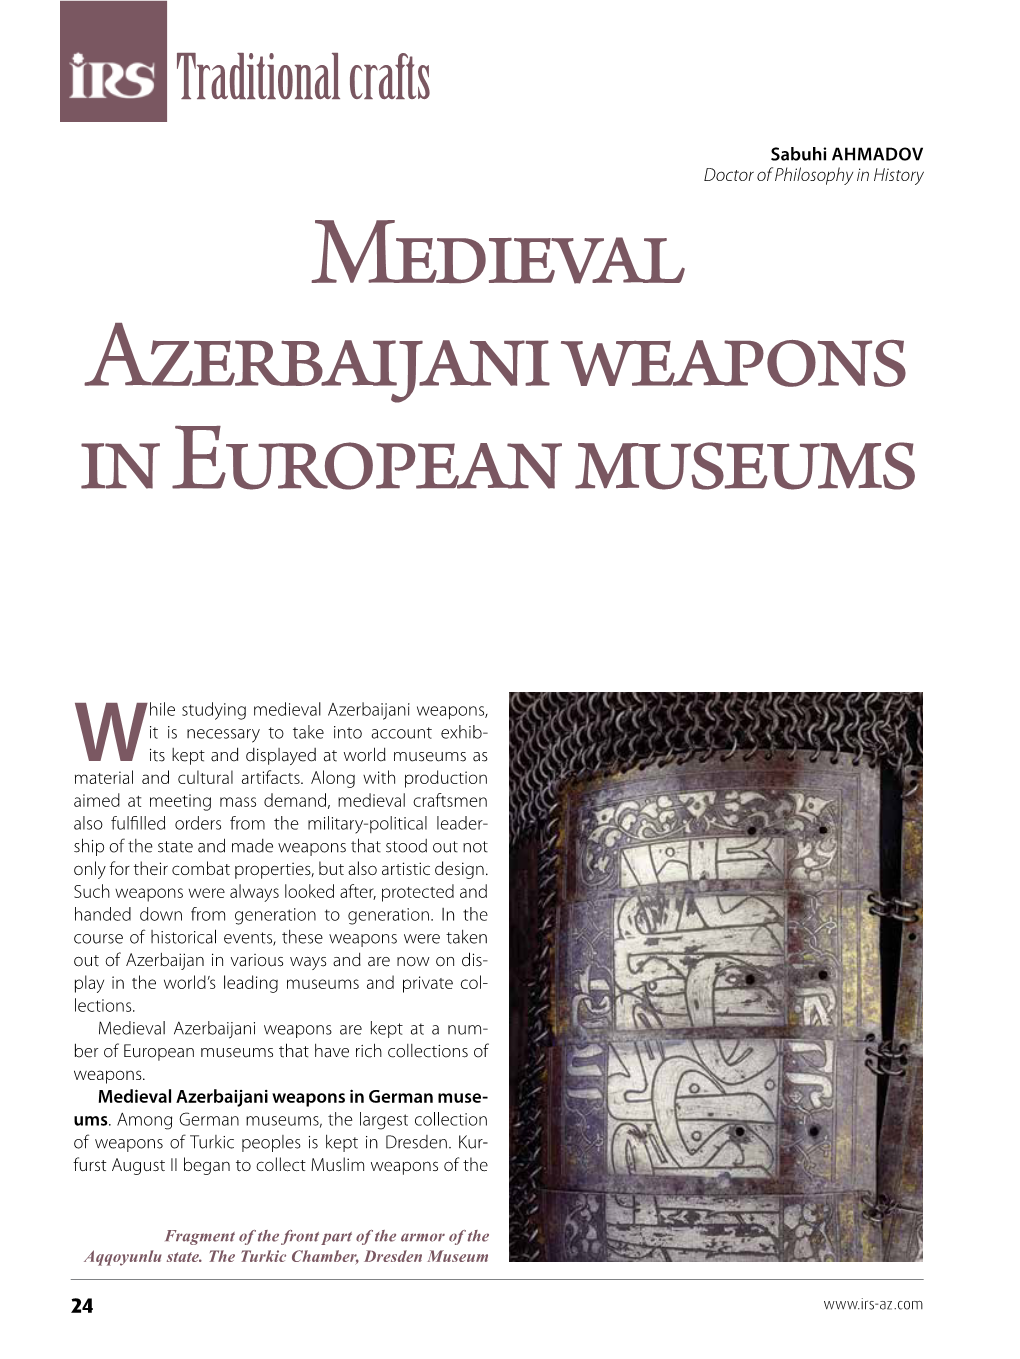 Medieval Azerbaijani Weapons in European Museums